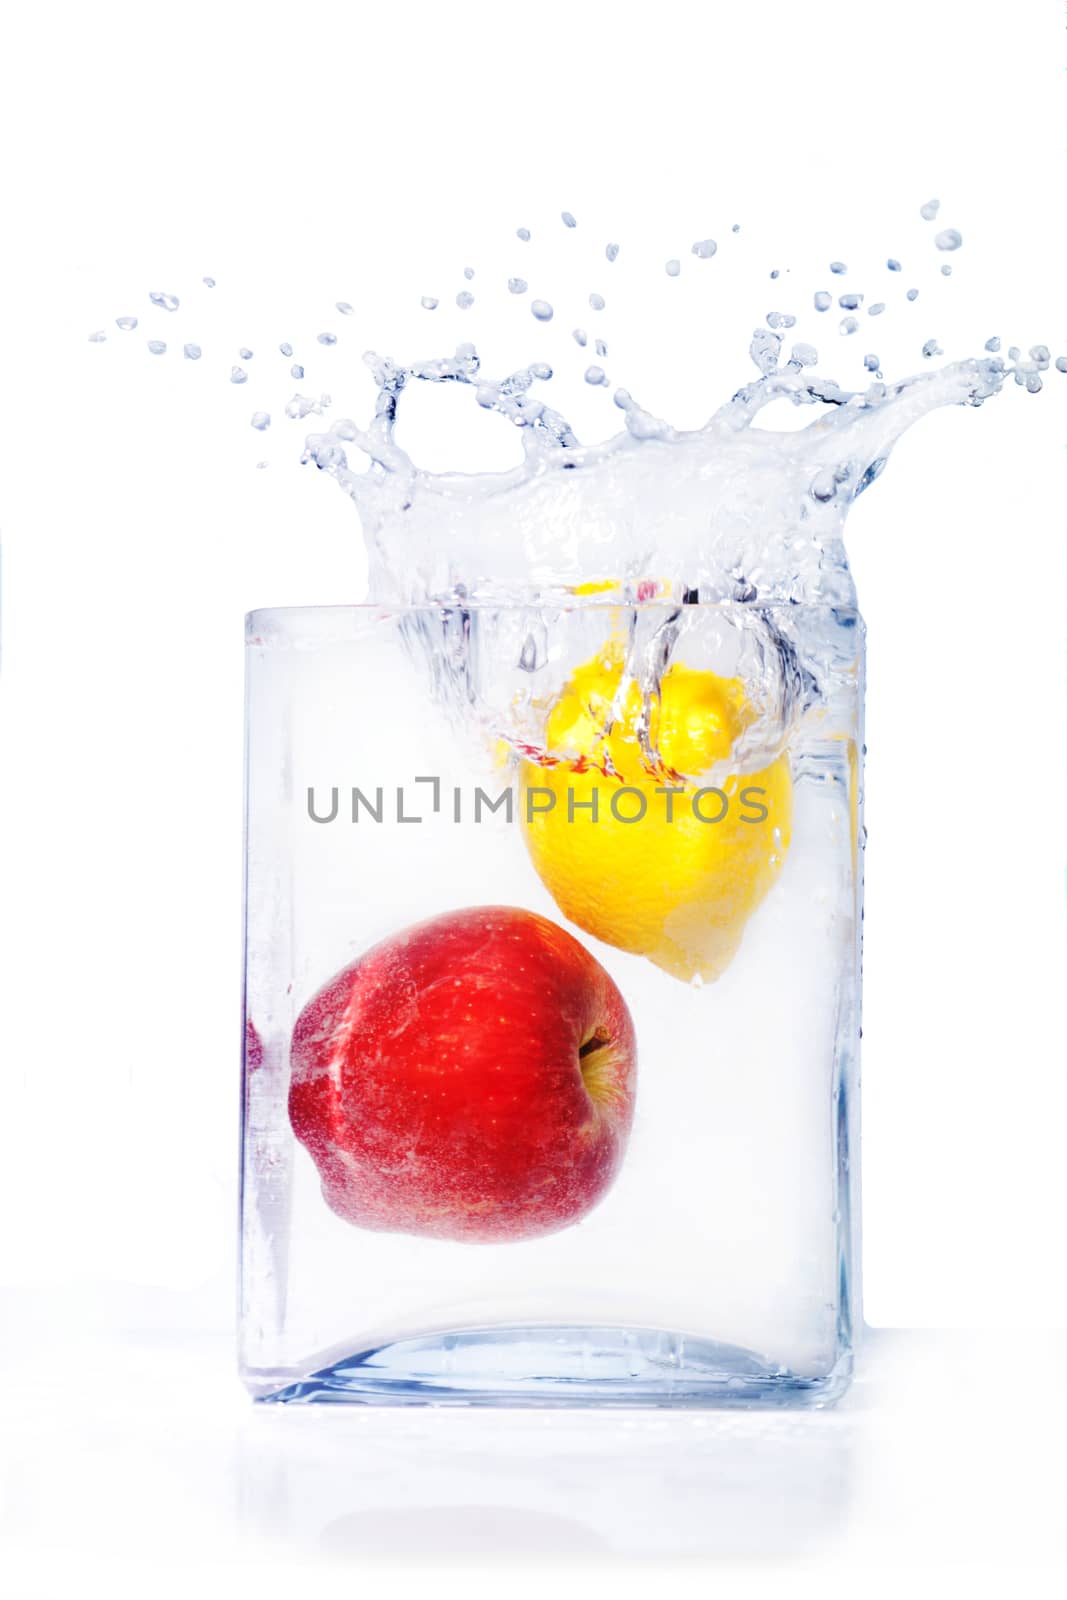 Apple and lemon in water and splashes  by yurii_bizgaimer